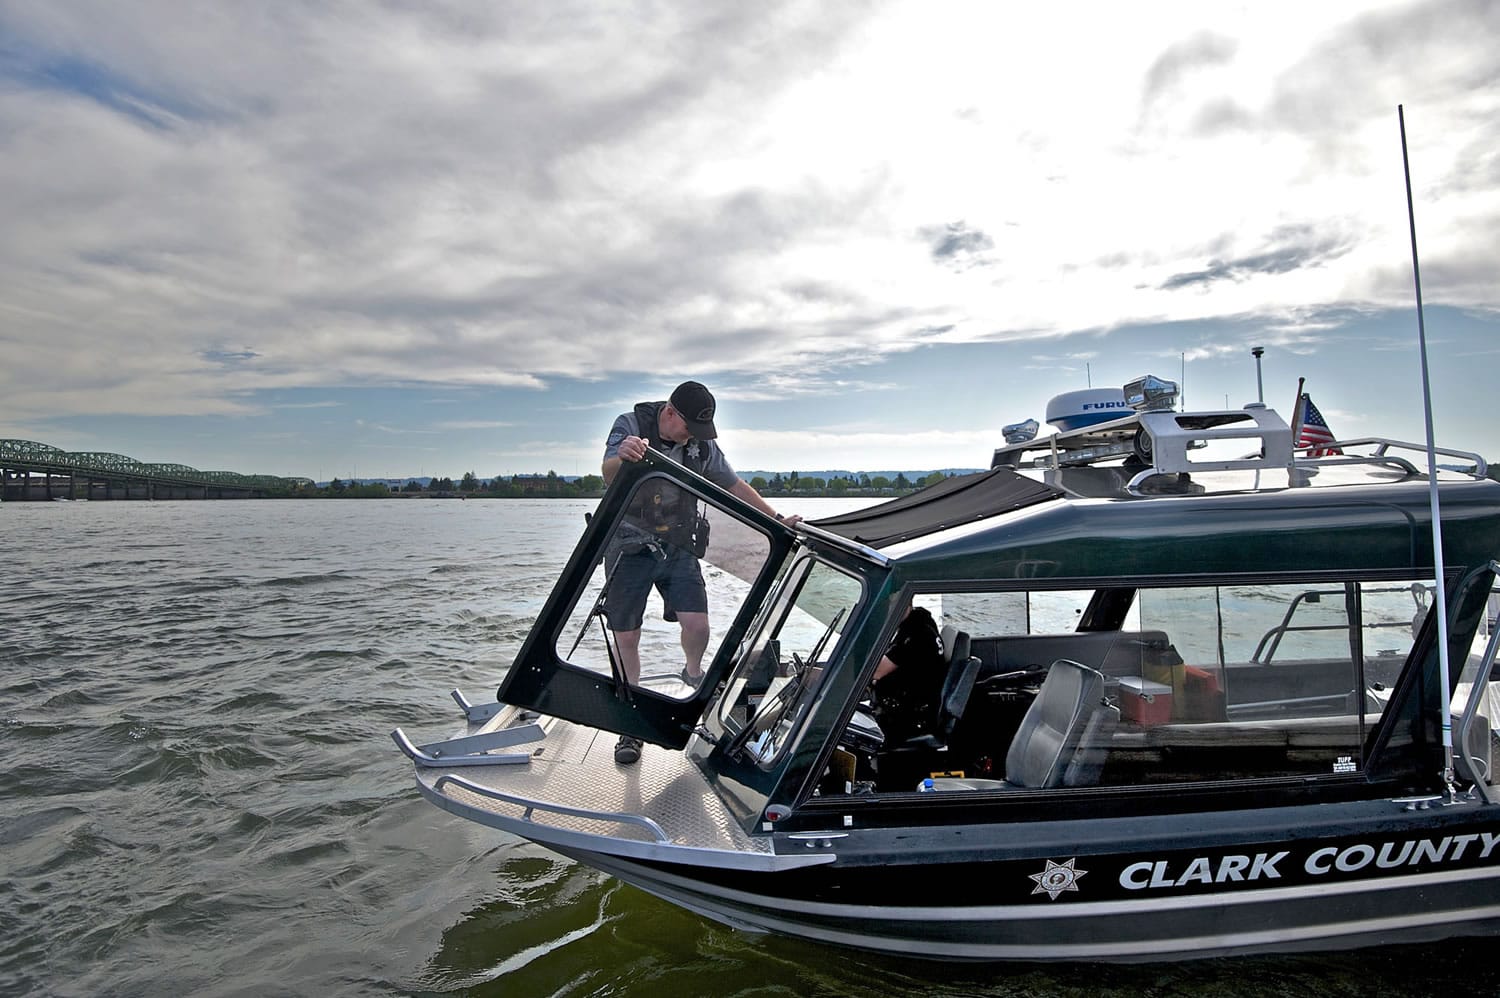 Clark County Sheriff&#039;s deputy Kevin Gadaire climbs back inside the marine patrol boat while patrolling the Columbia River in 2014.